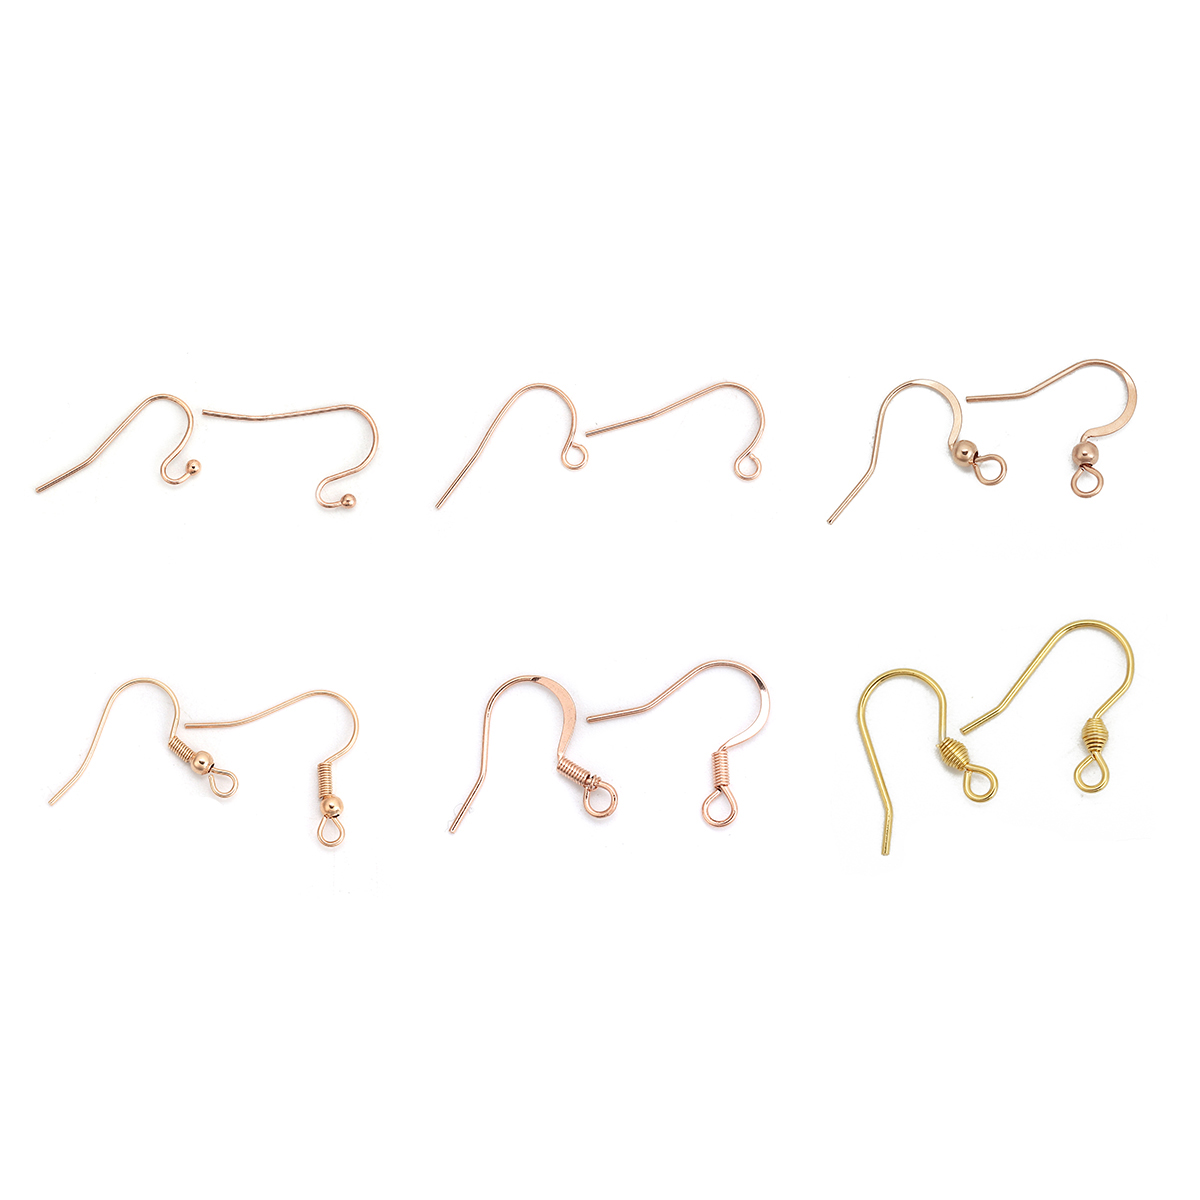 Picture of 316 Stainless Steel Ear Wire Hooks Earring Findings Gold Plated W/ Loop 16mm( 5/8") x 13mm( 4/8"), Post/ Wire Size: (21 gauge), 20 PCs